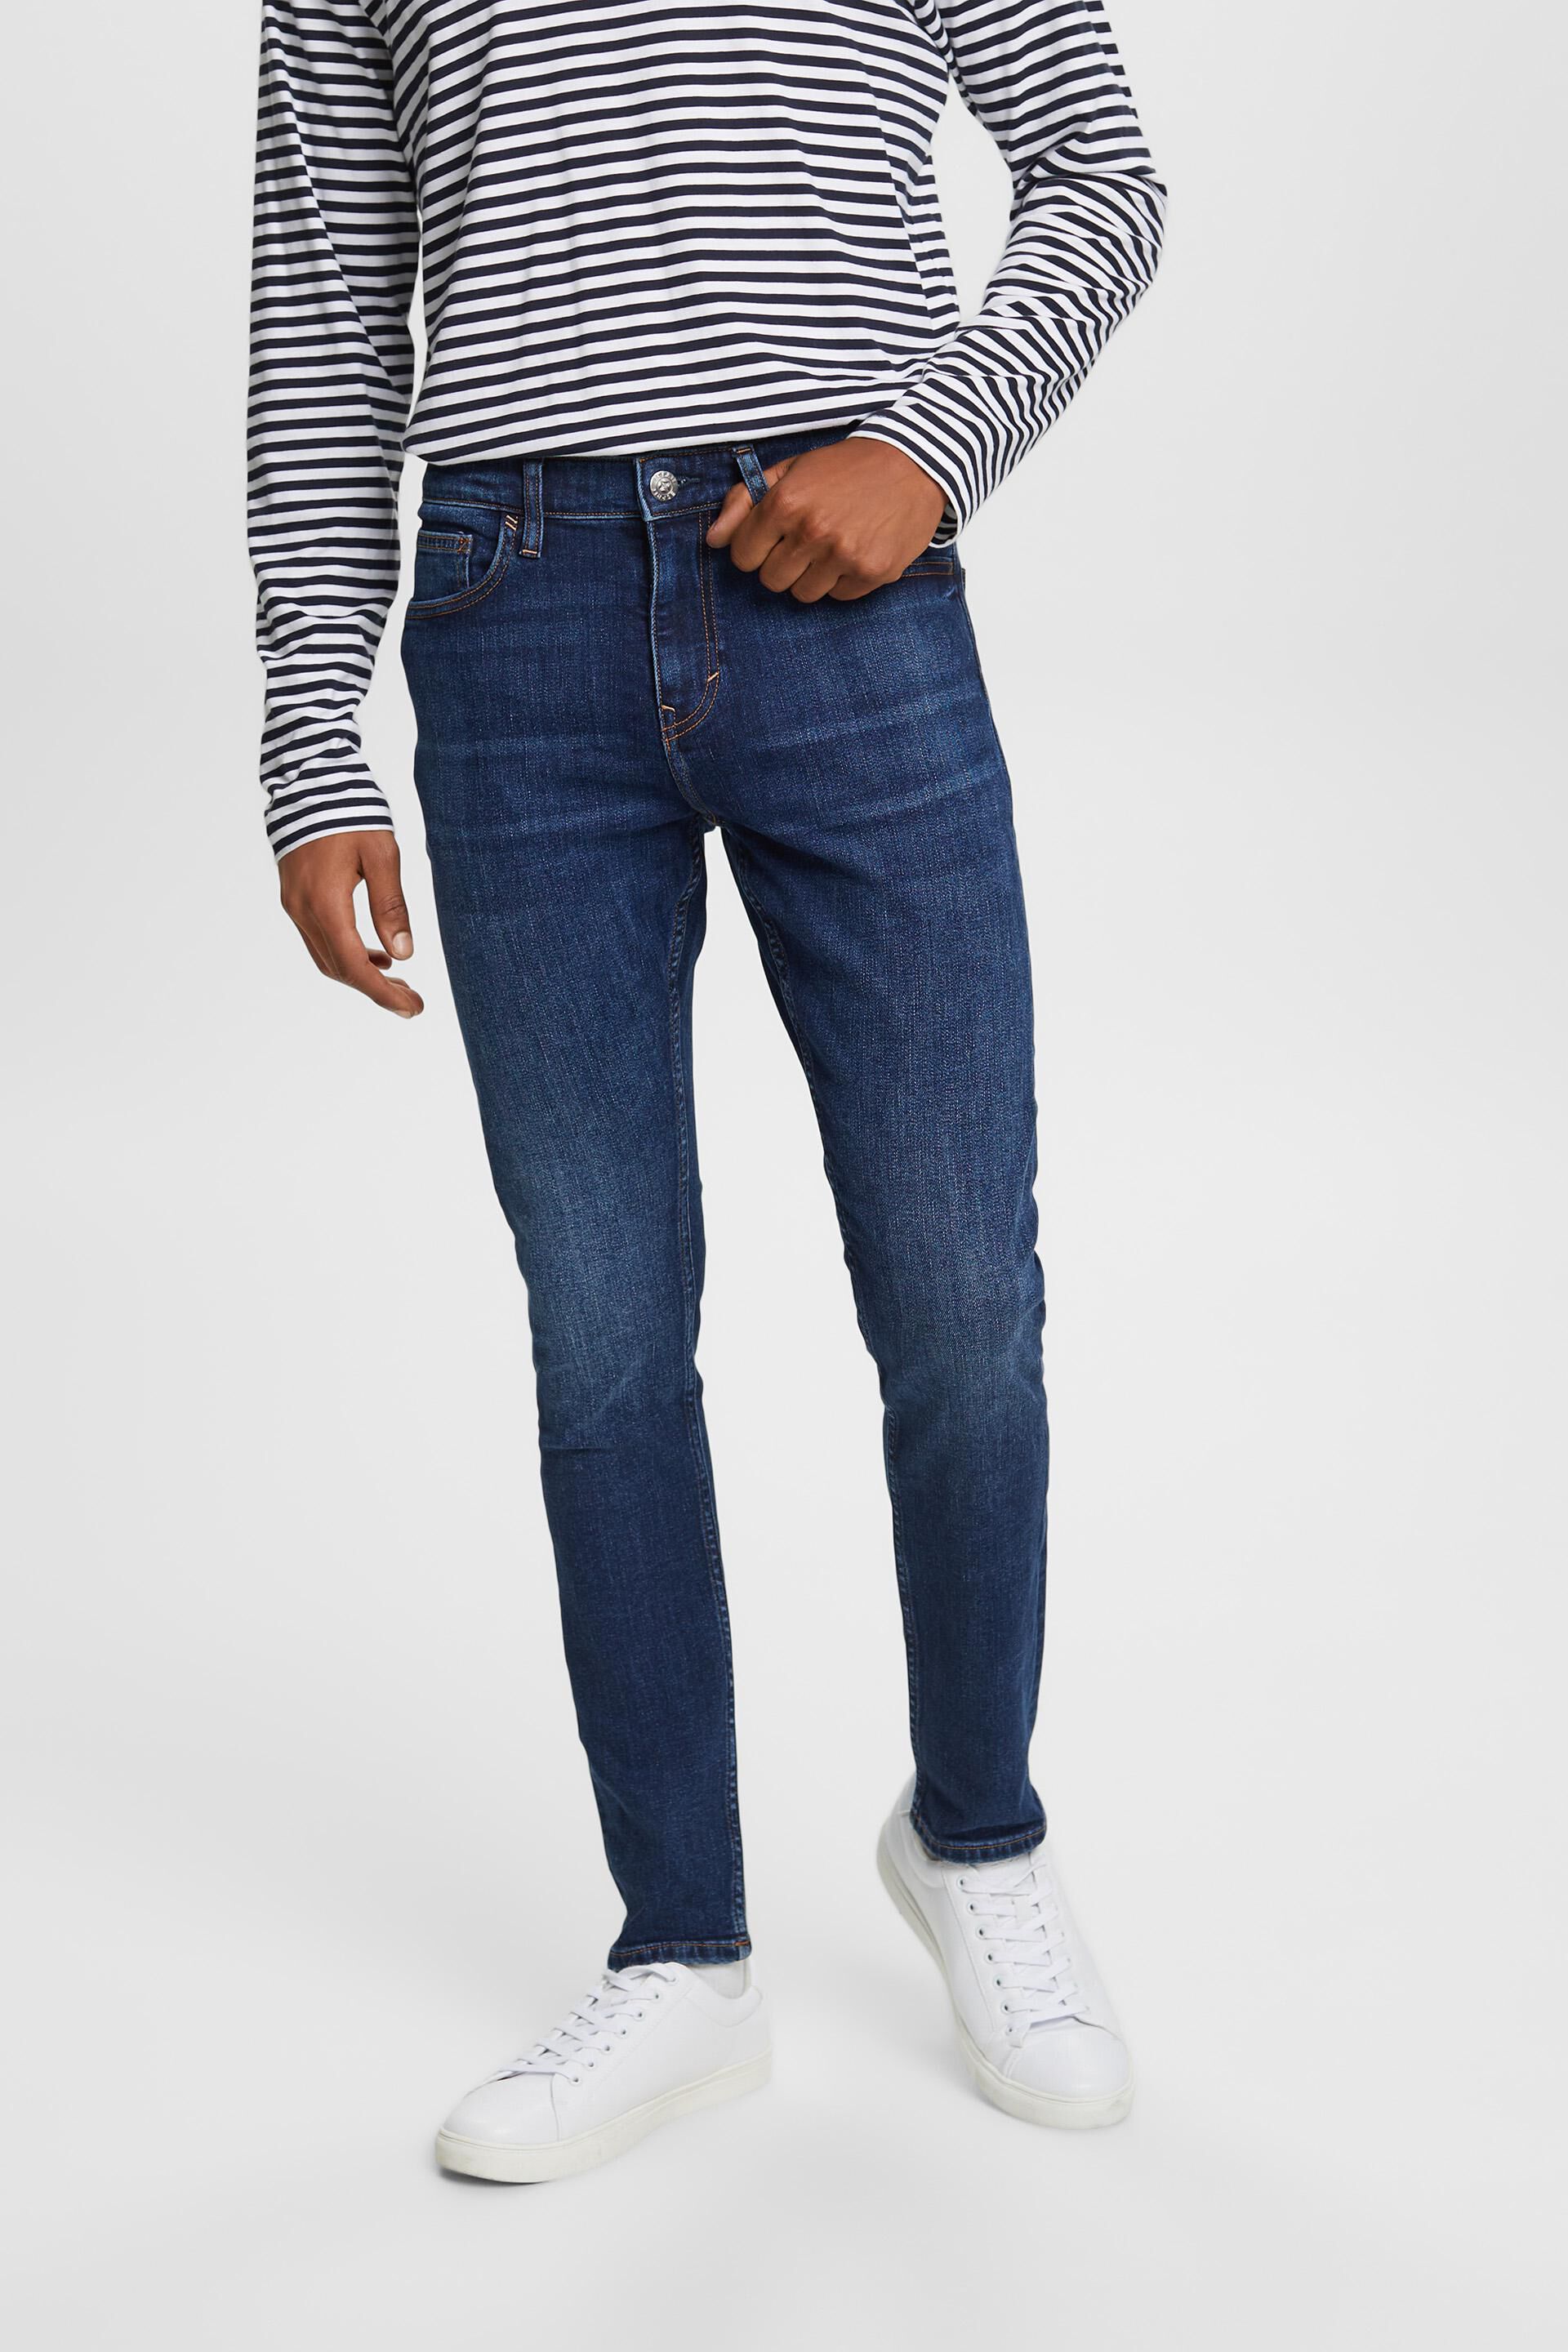 Esprit recycled Skinny stretch cotton jeans,